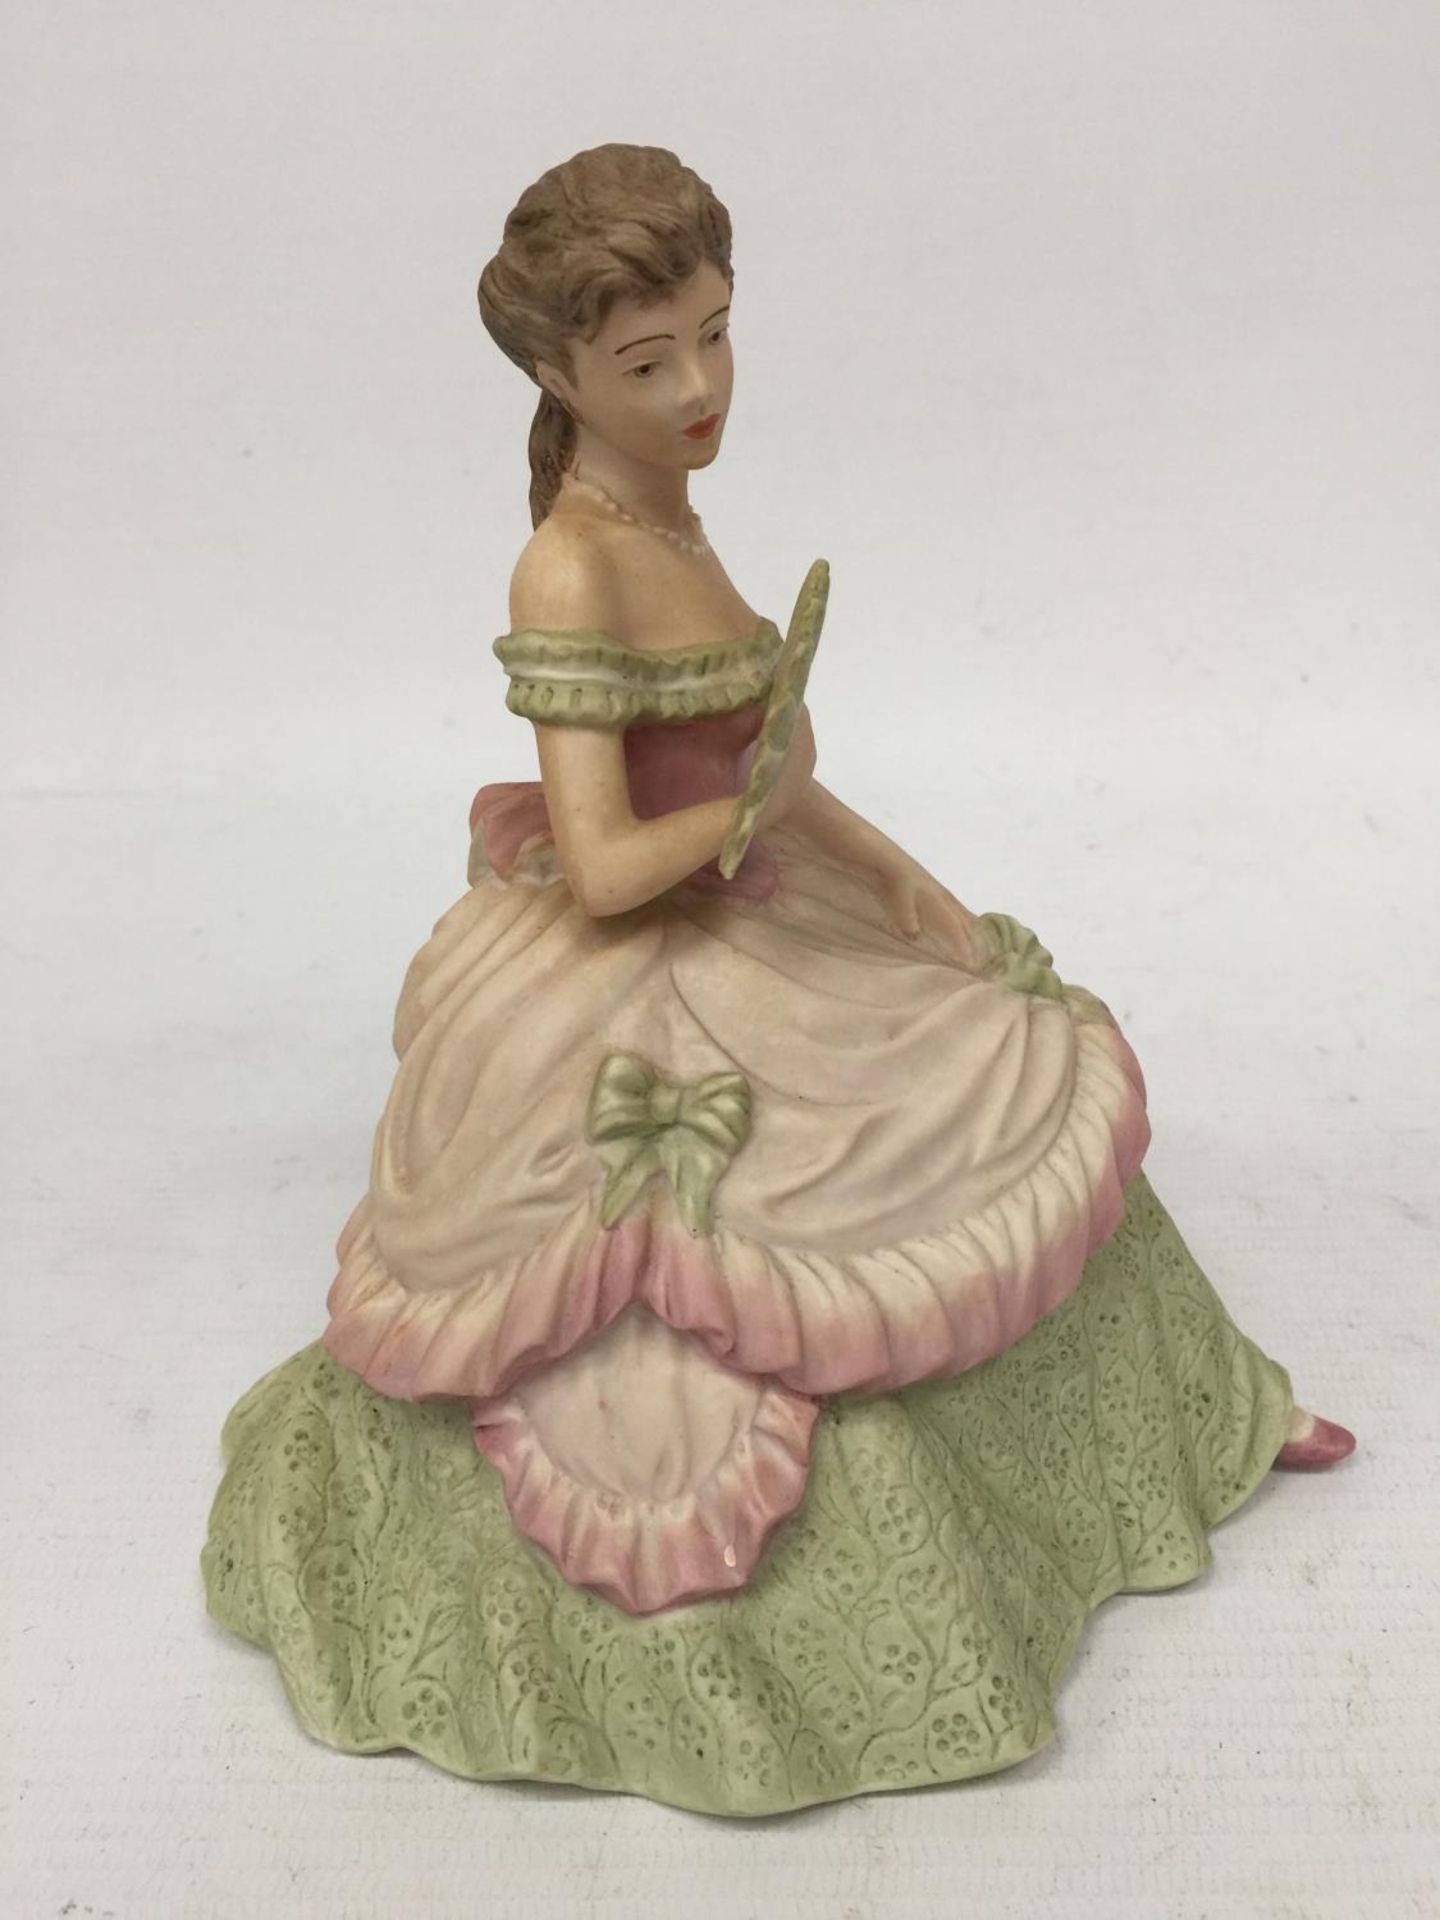 A COALPORT FIGURINE "INTERLUDE" FROM THE AGE OF ELEGANCE COLLECTION 1991 WITH A MATT FINISH - 17 CM - Image 2 of 5